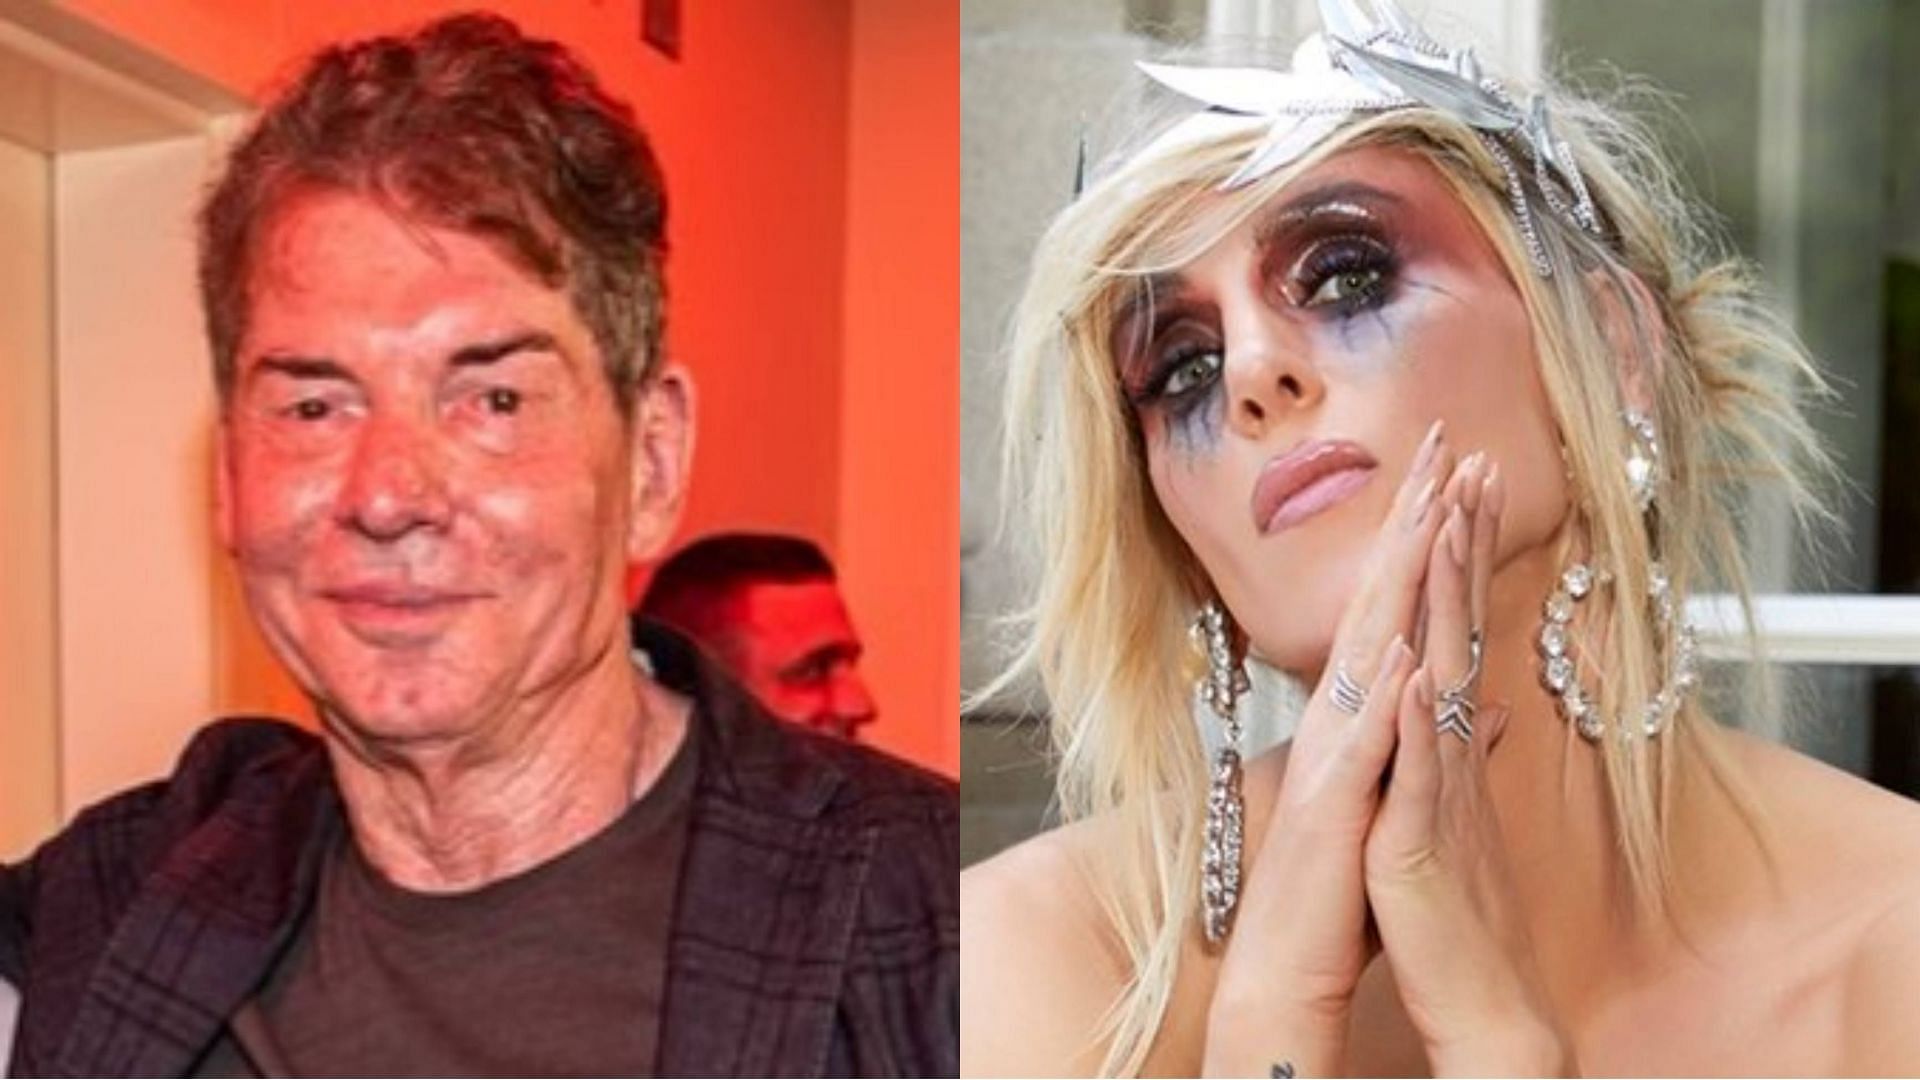 Vince McMahon (left) and Charlotte Flair (right)